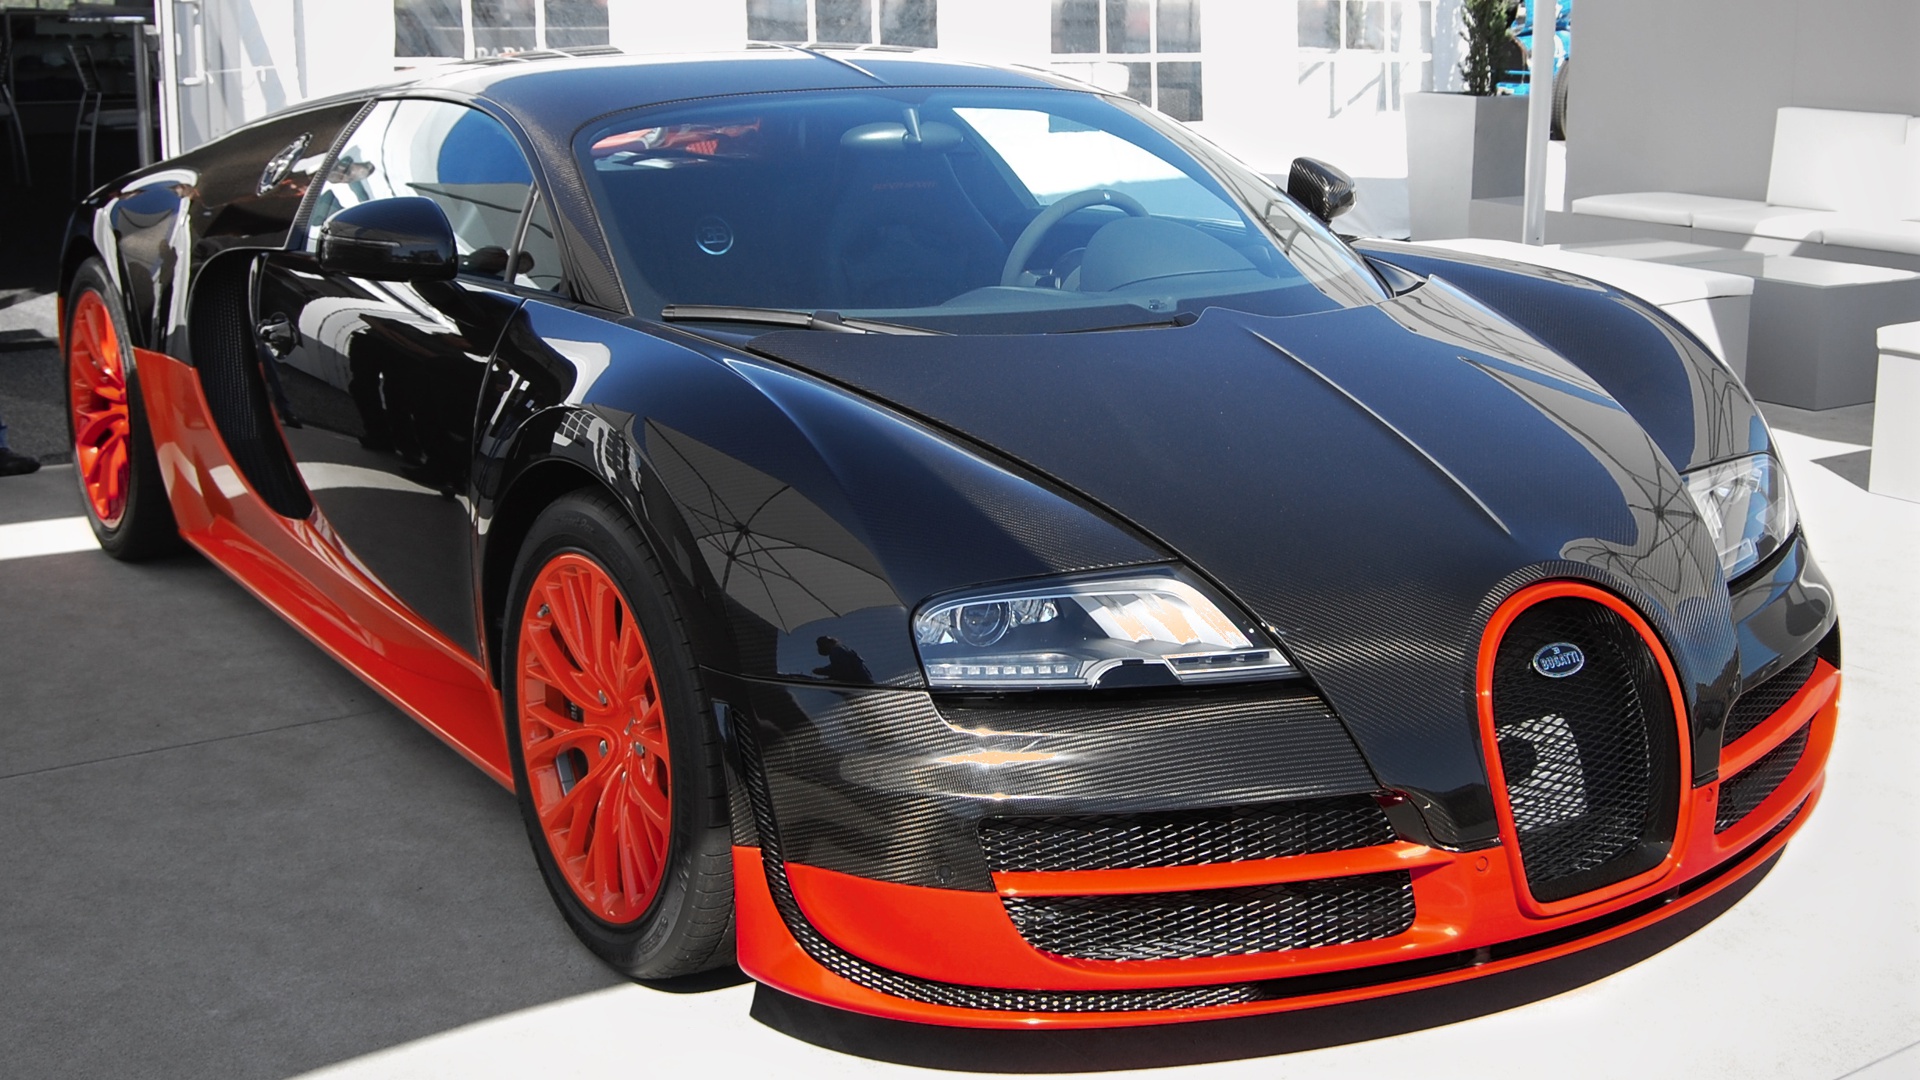 Bugatti On HD Wallpaper For Your Desktop Galibier Veyron And More